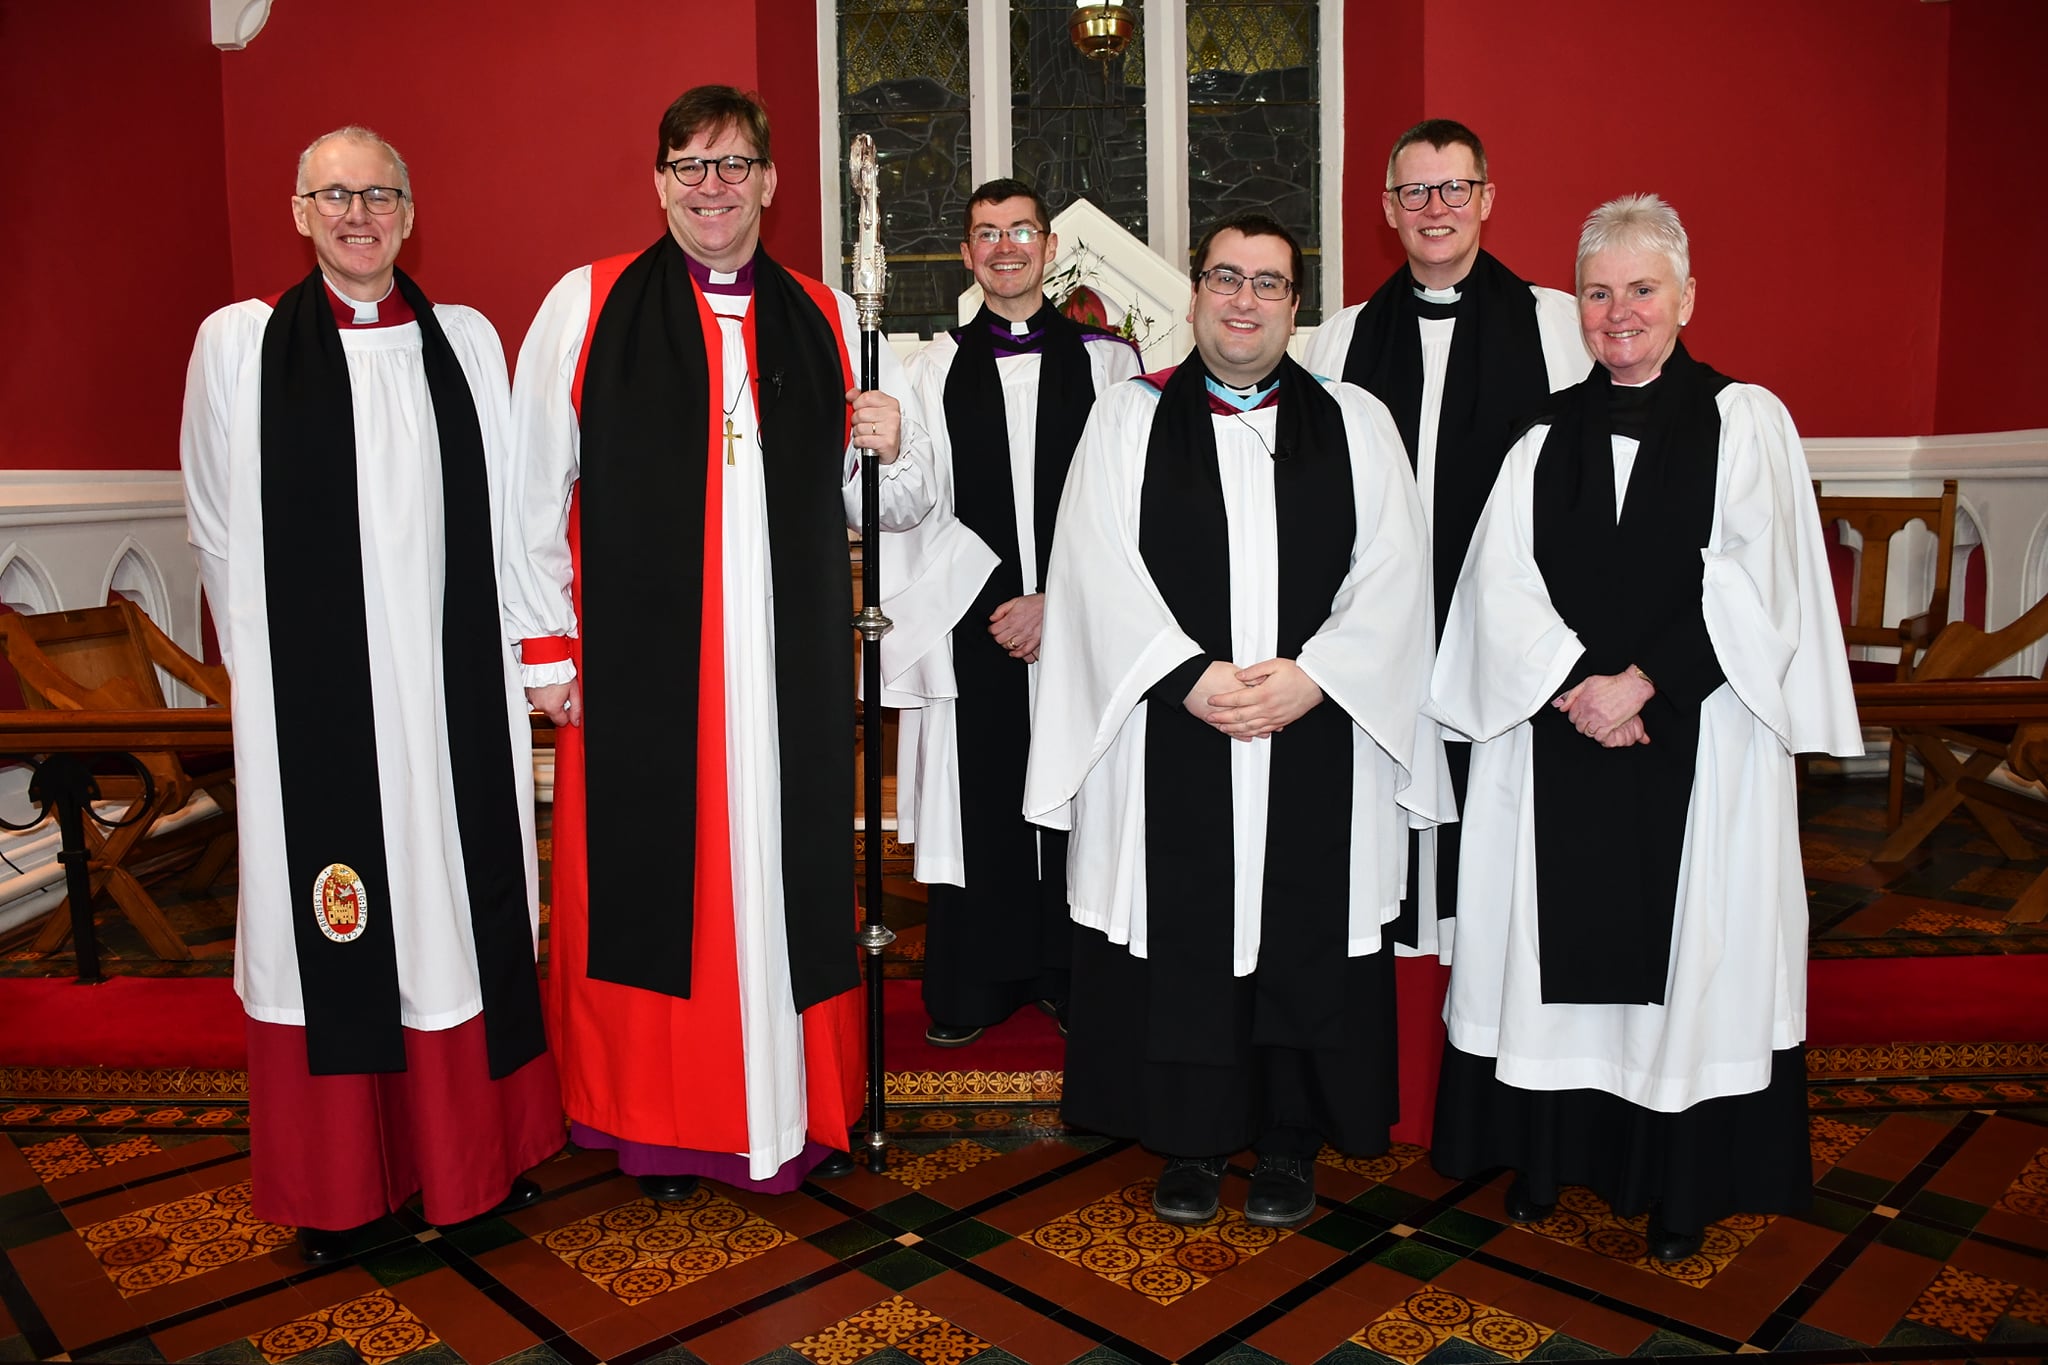 From left: the Rev Canon Colin Welsh (Rural Dean); Bishop Andrew Forster; the Rev Chris Mac Bruithin (Preacher); the Rev Philip Benson (new Incumbent);the Ven Robert Miller (Archdeacon of Derry); and the Rev Carmen Hayes (Bishop's Curate).